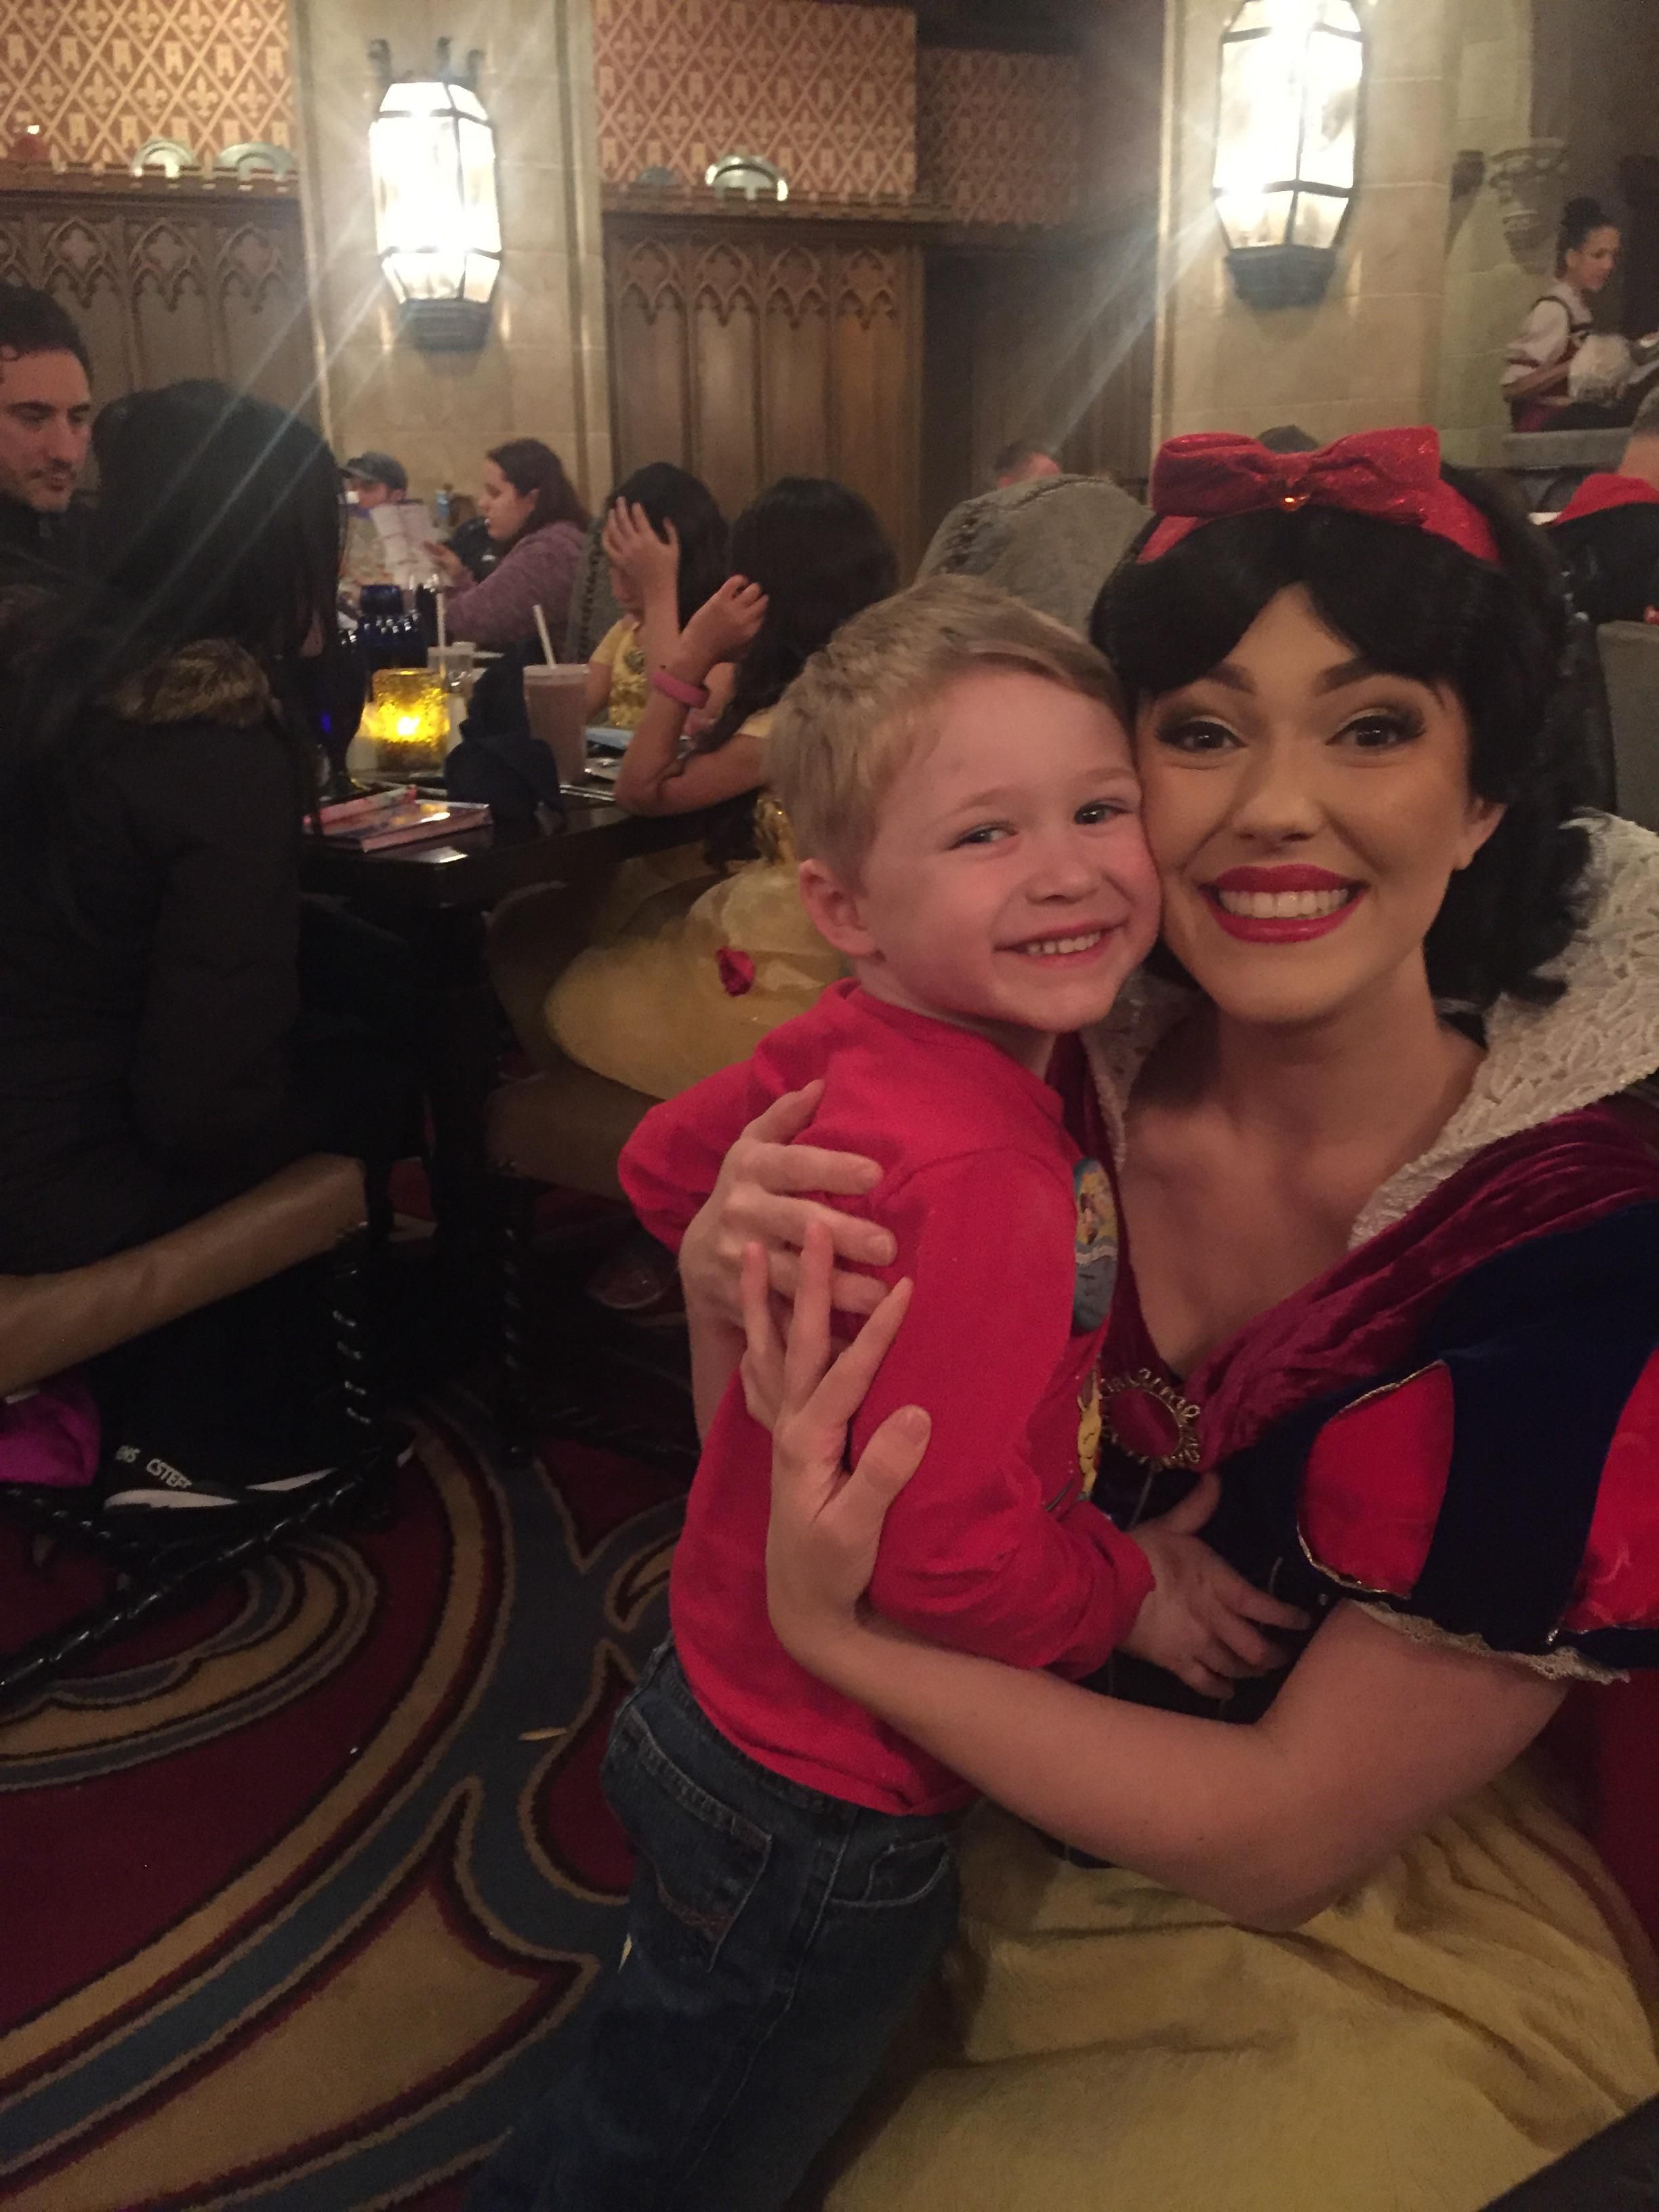 My parents took my 4 yo Nephew to Disney World this week, and they were afraid he would get bored of all the princesses.